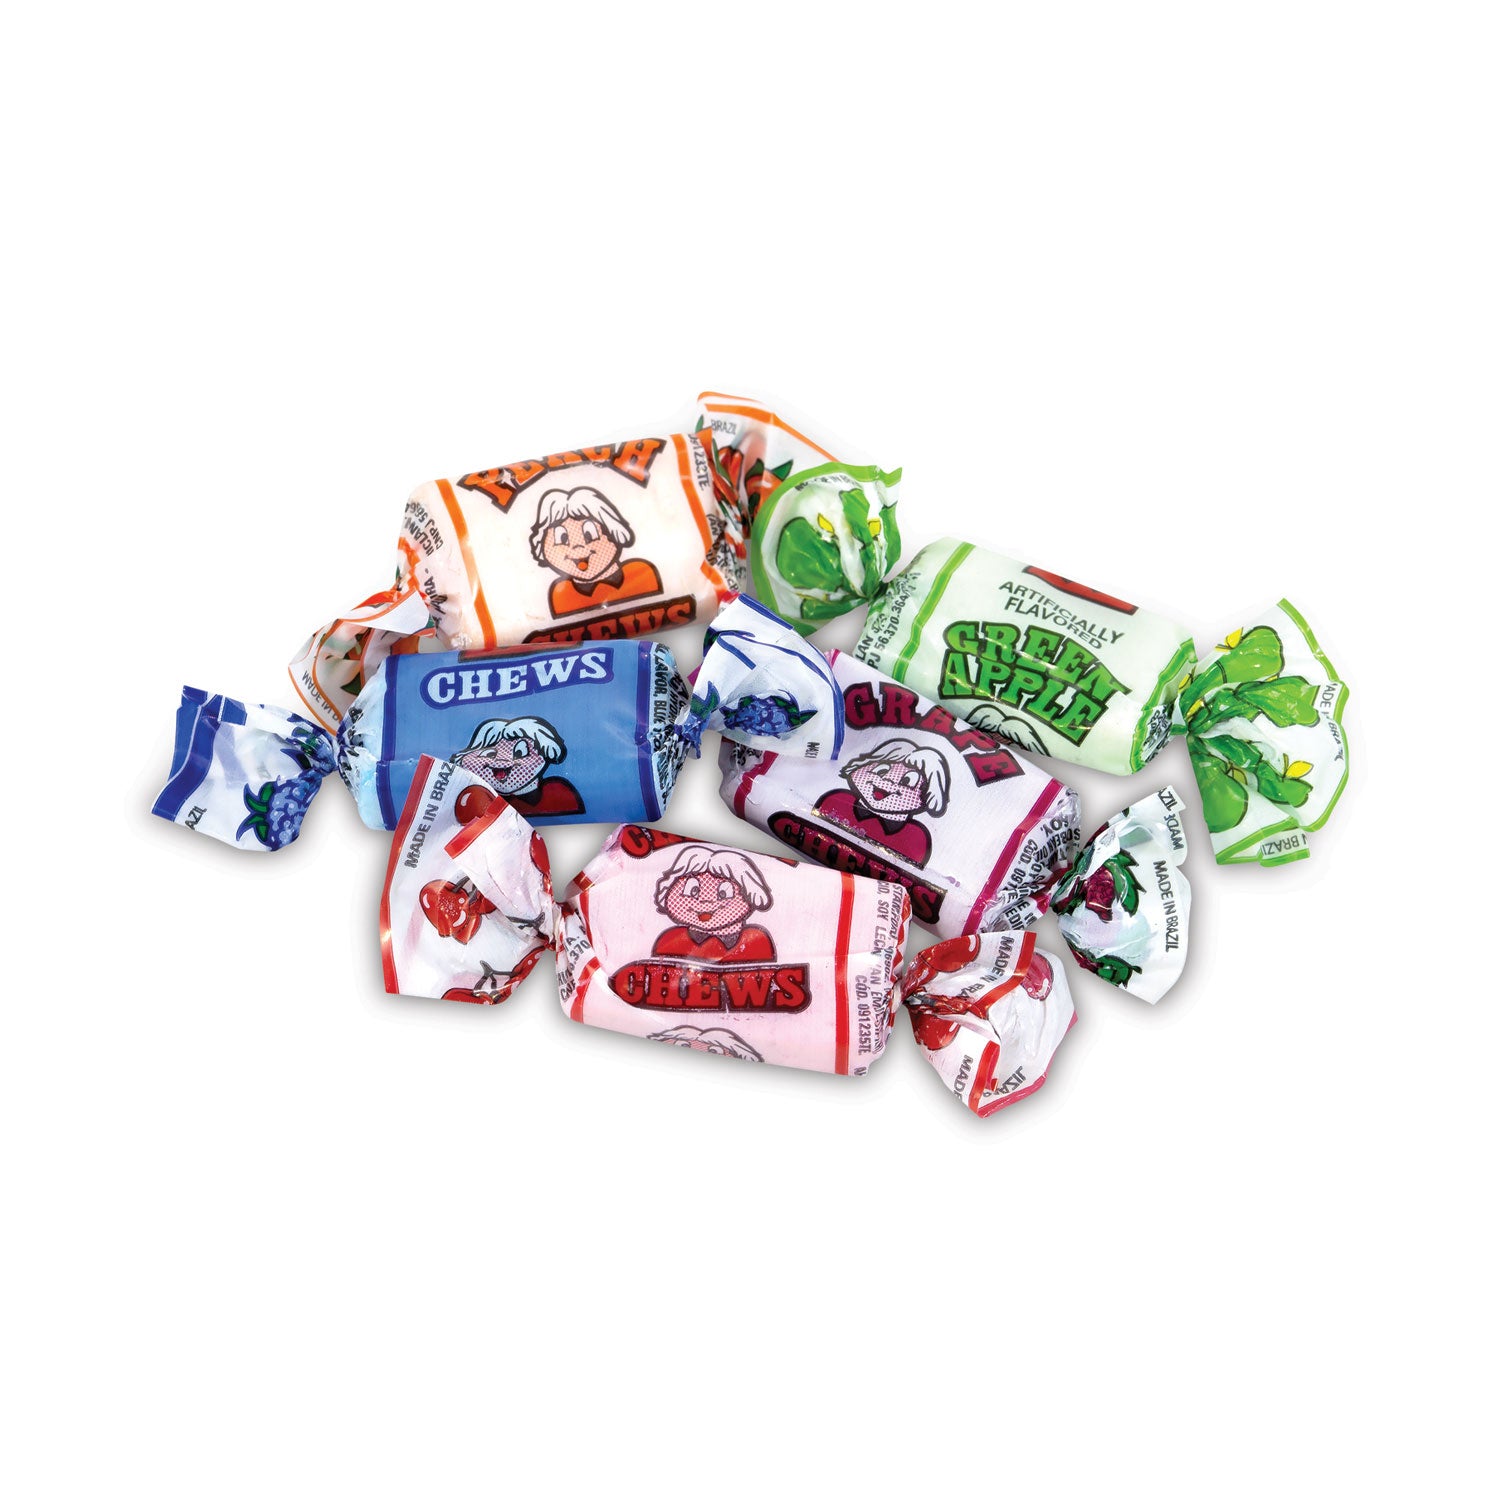 assorted-fruit-chews-15-lb-bag-approx-240-pieces-ships-in-1-3-business-days_grr20901227 - 1